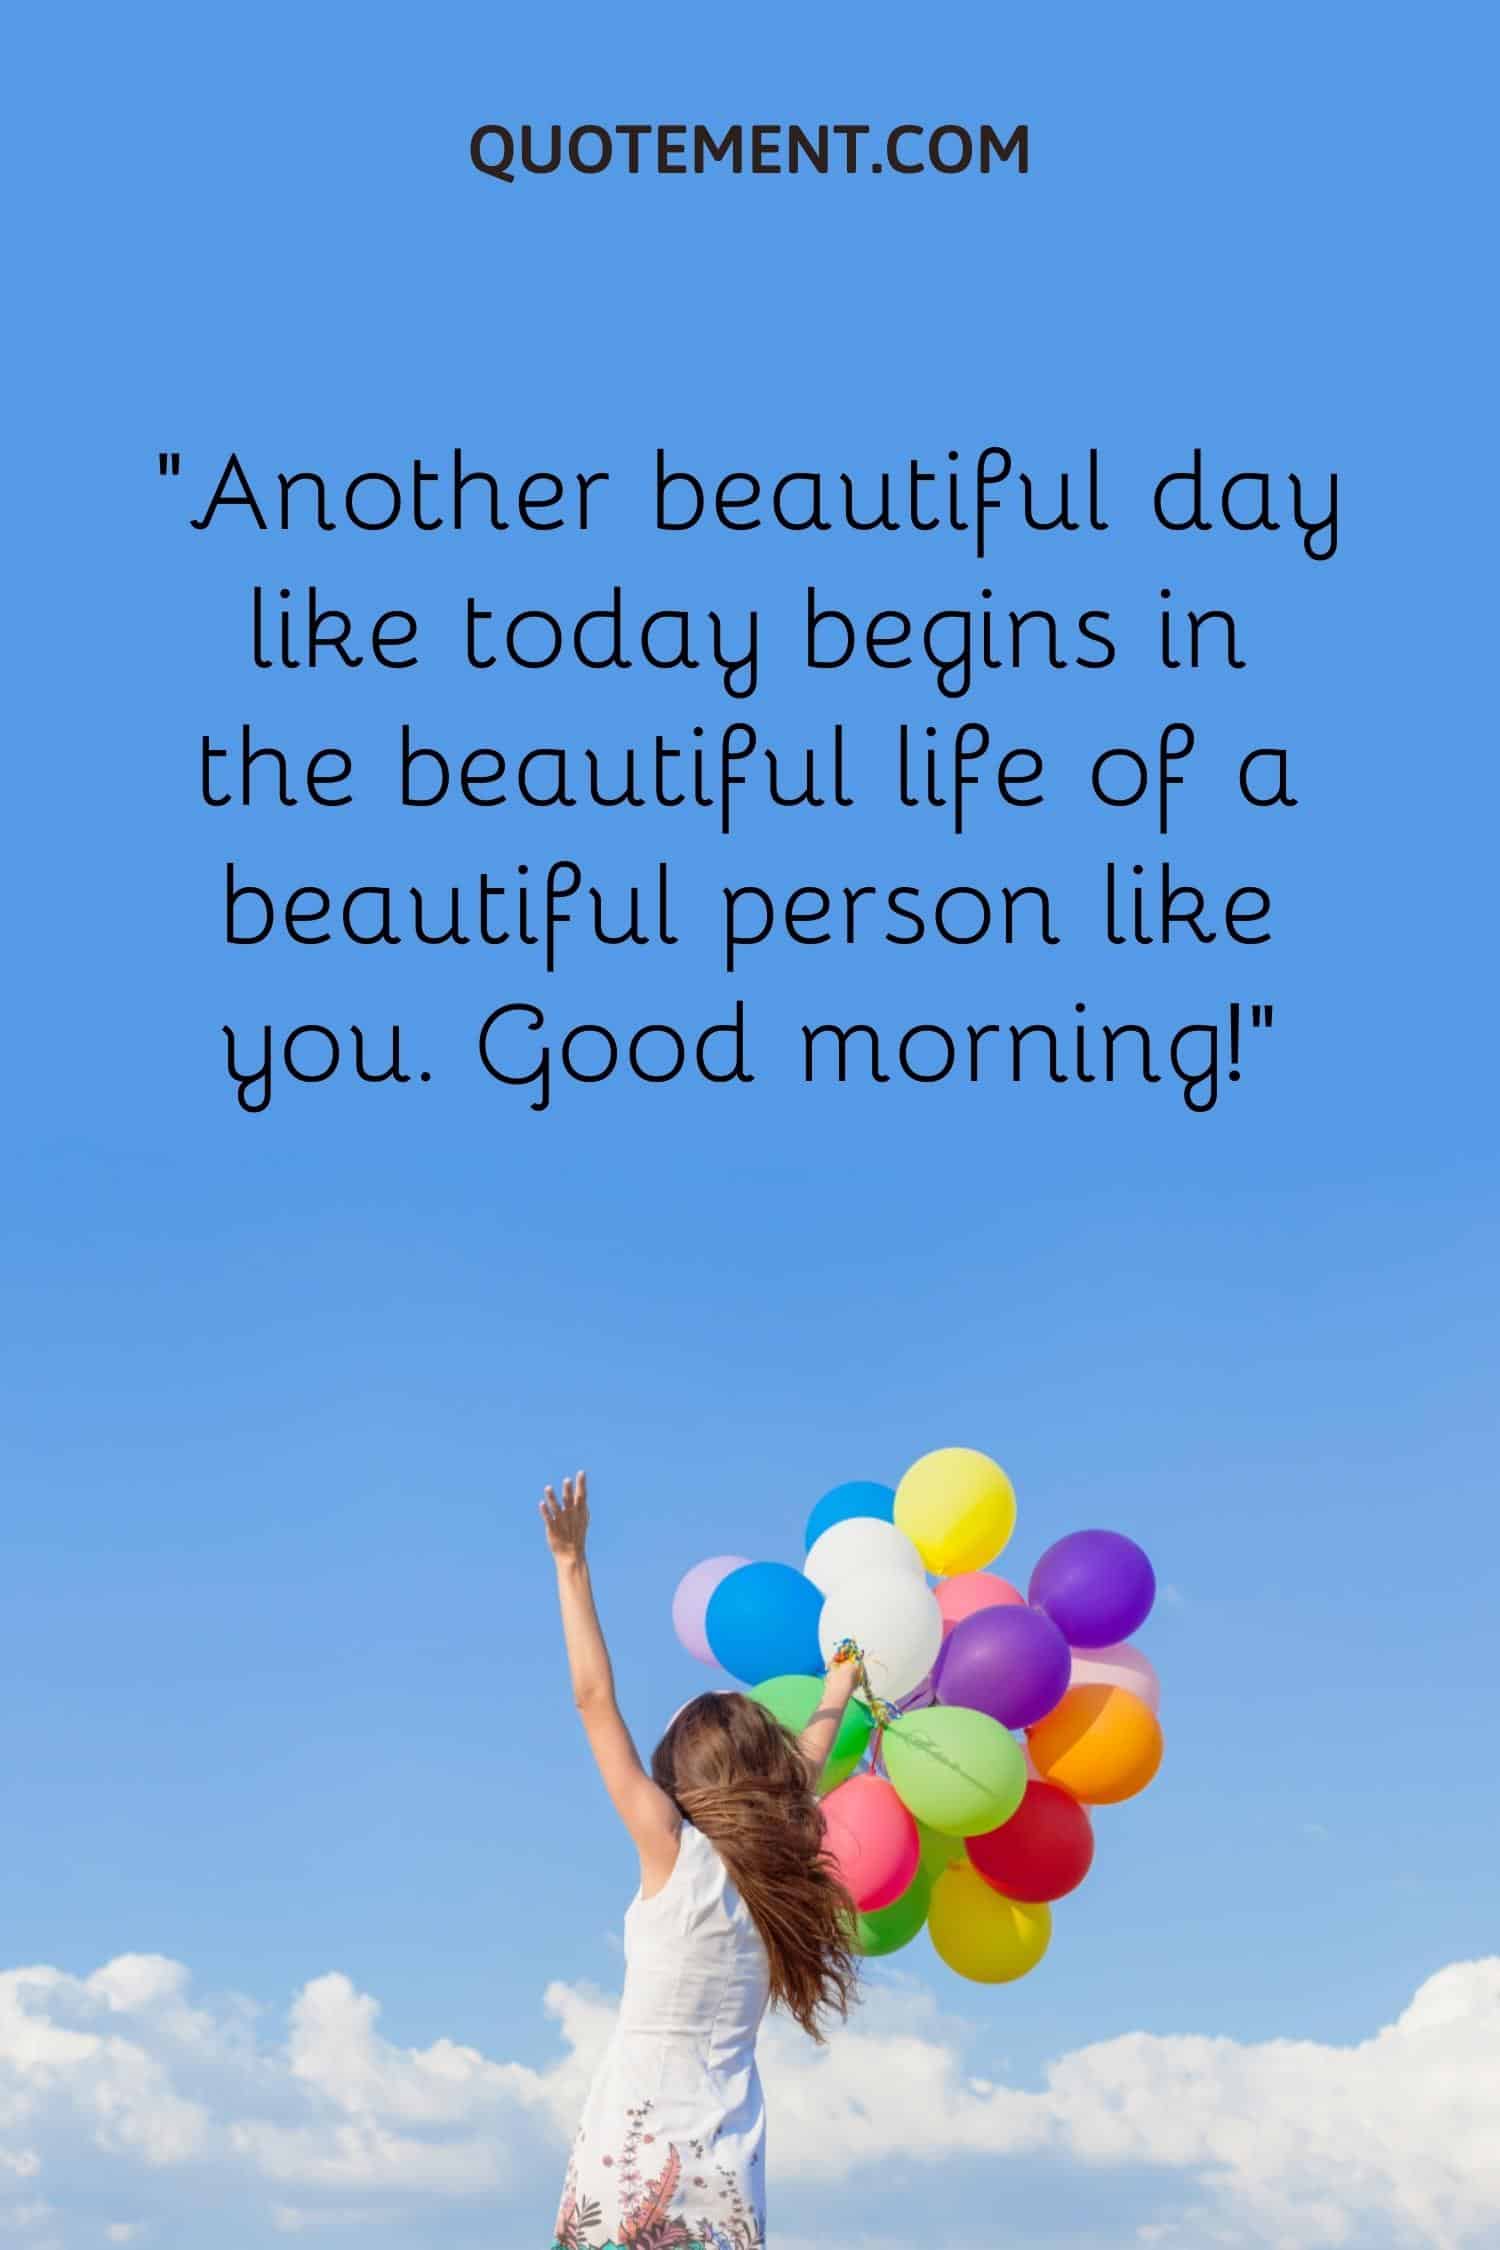 Another beautiful day like today begins in the beautiful life of a beautiful person like you